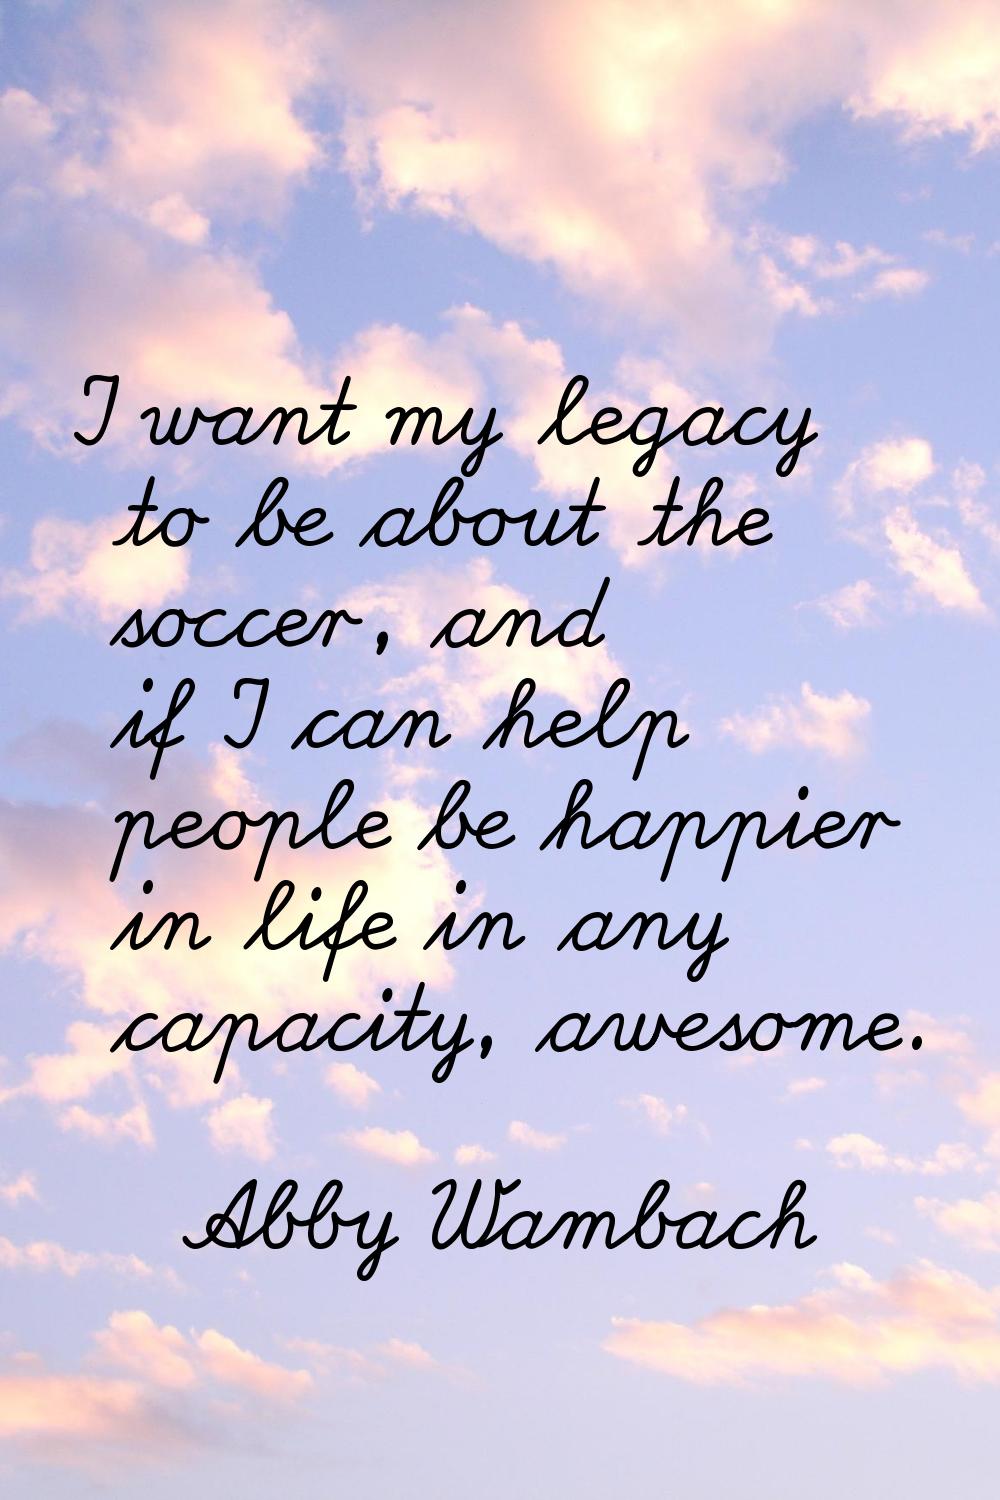 I want my legacy to be about the soccer, and if I can help people be happier in life in any capacit